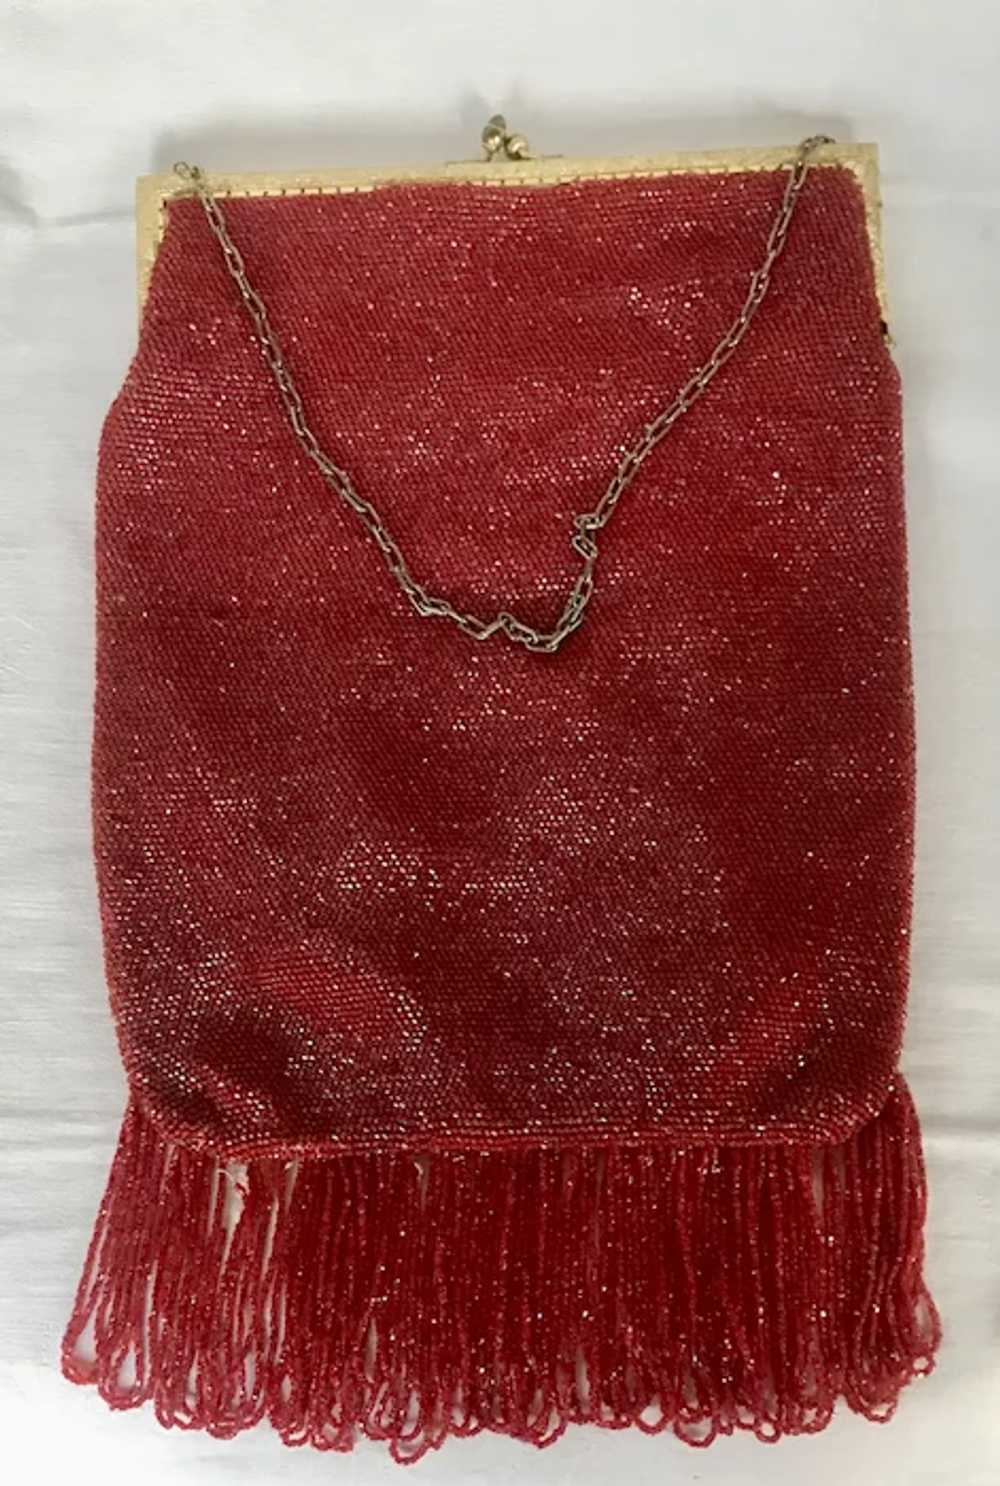 Vintage Large Red Micro Glass Bead Flapper Bag - image 6